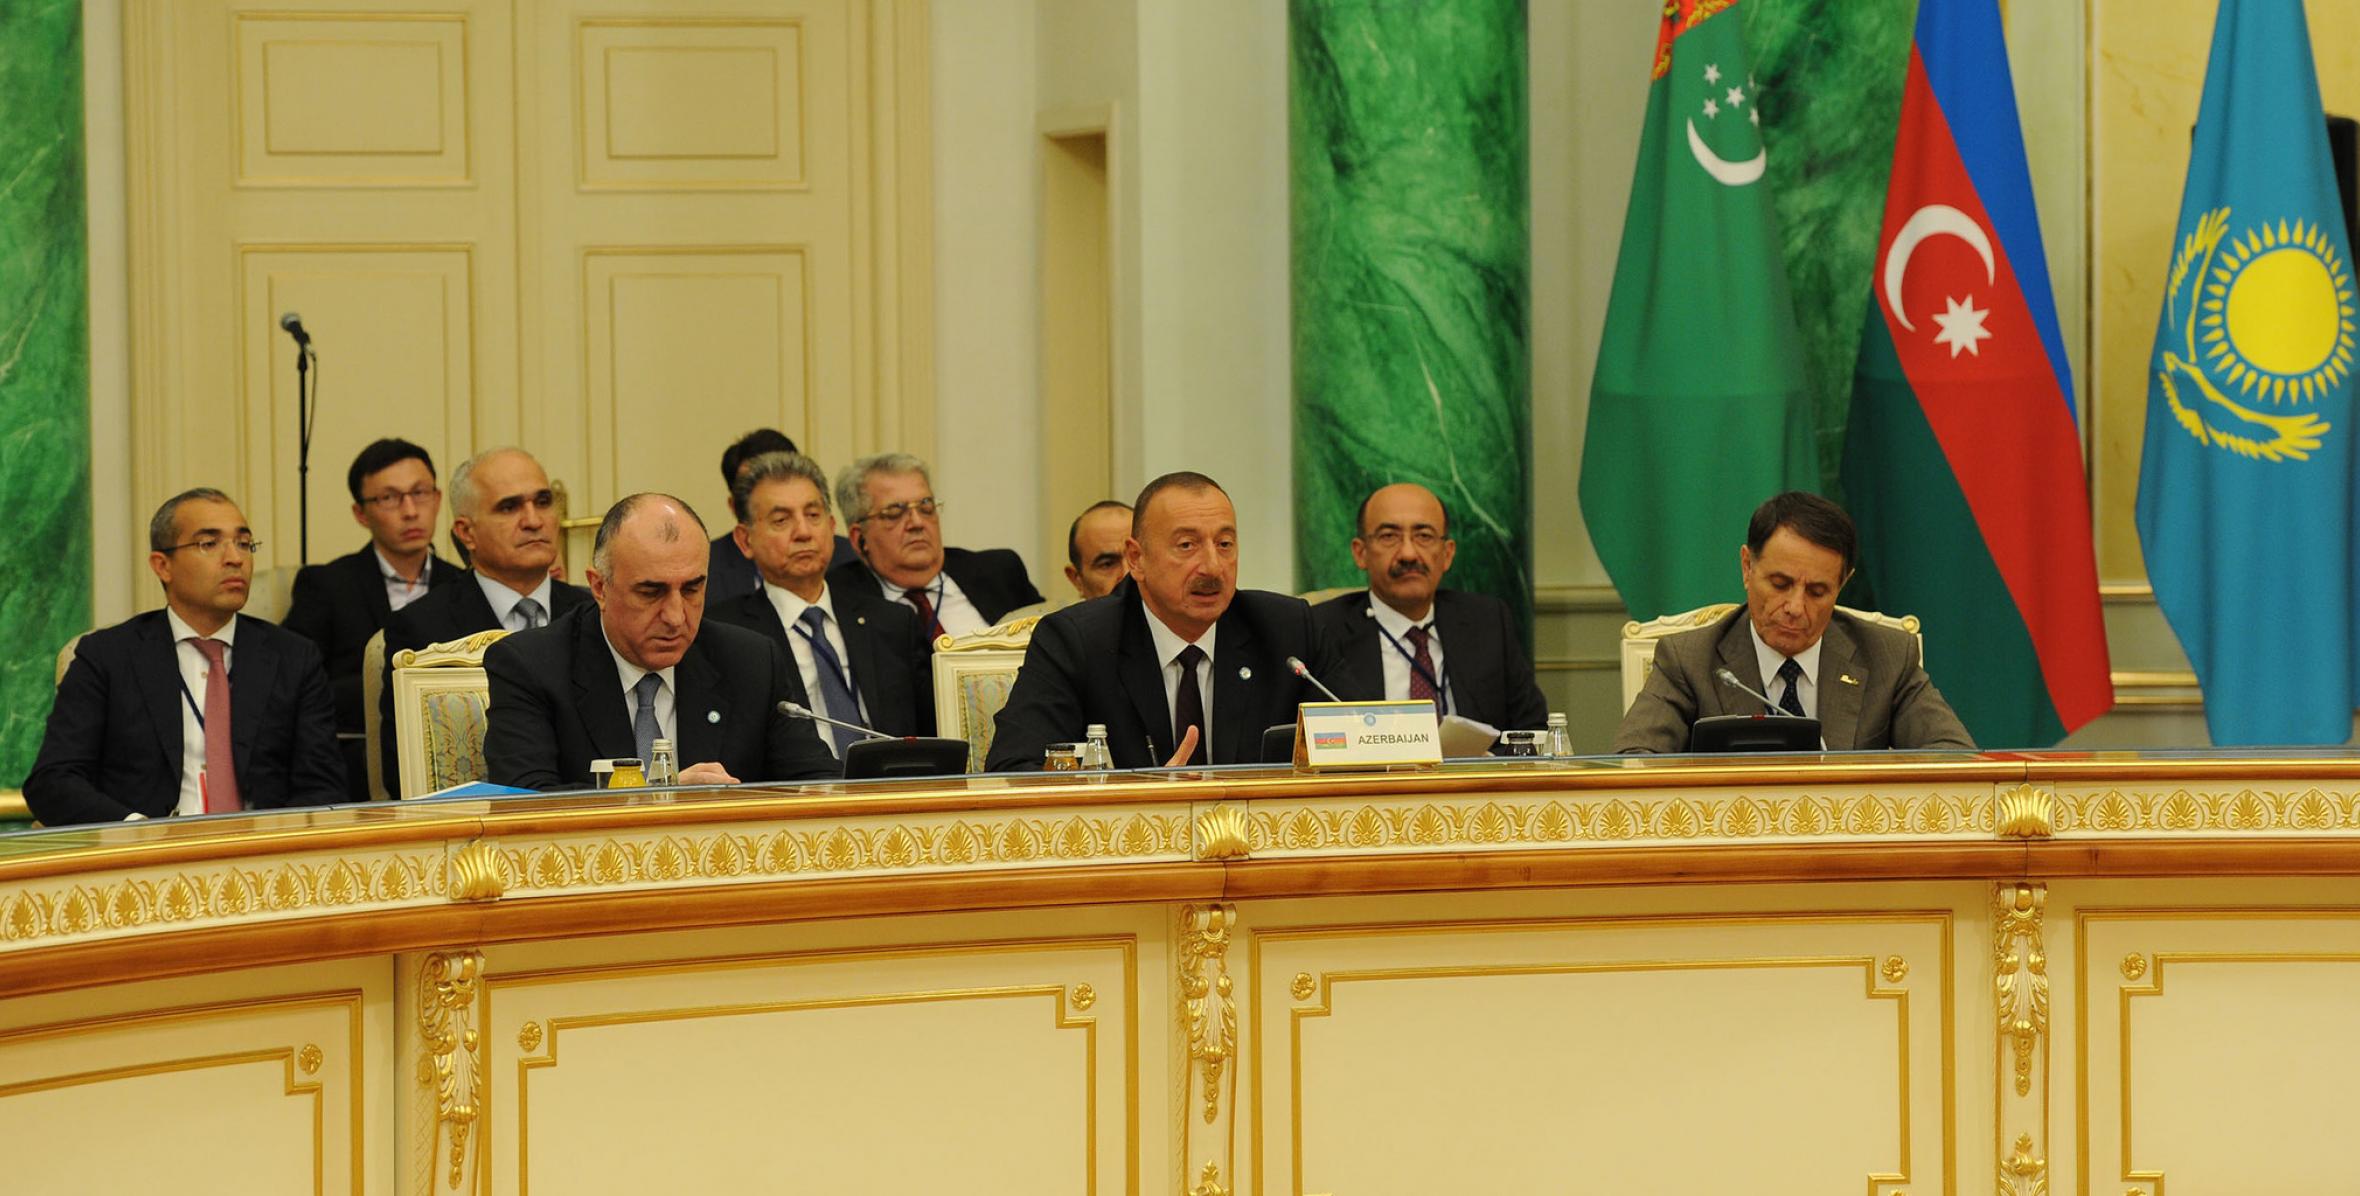 Speech by Ilham Aliyev at the 5th Summit of the Cooperation Council of Turkic Speaking States